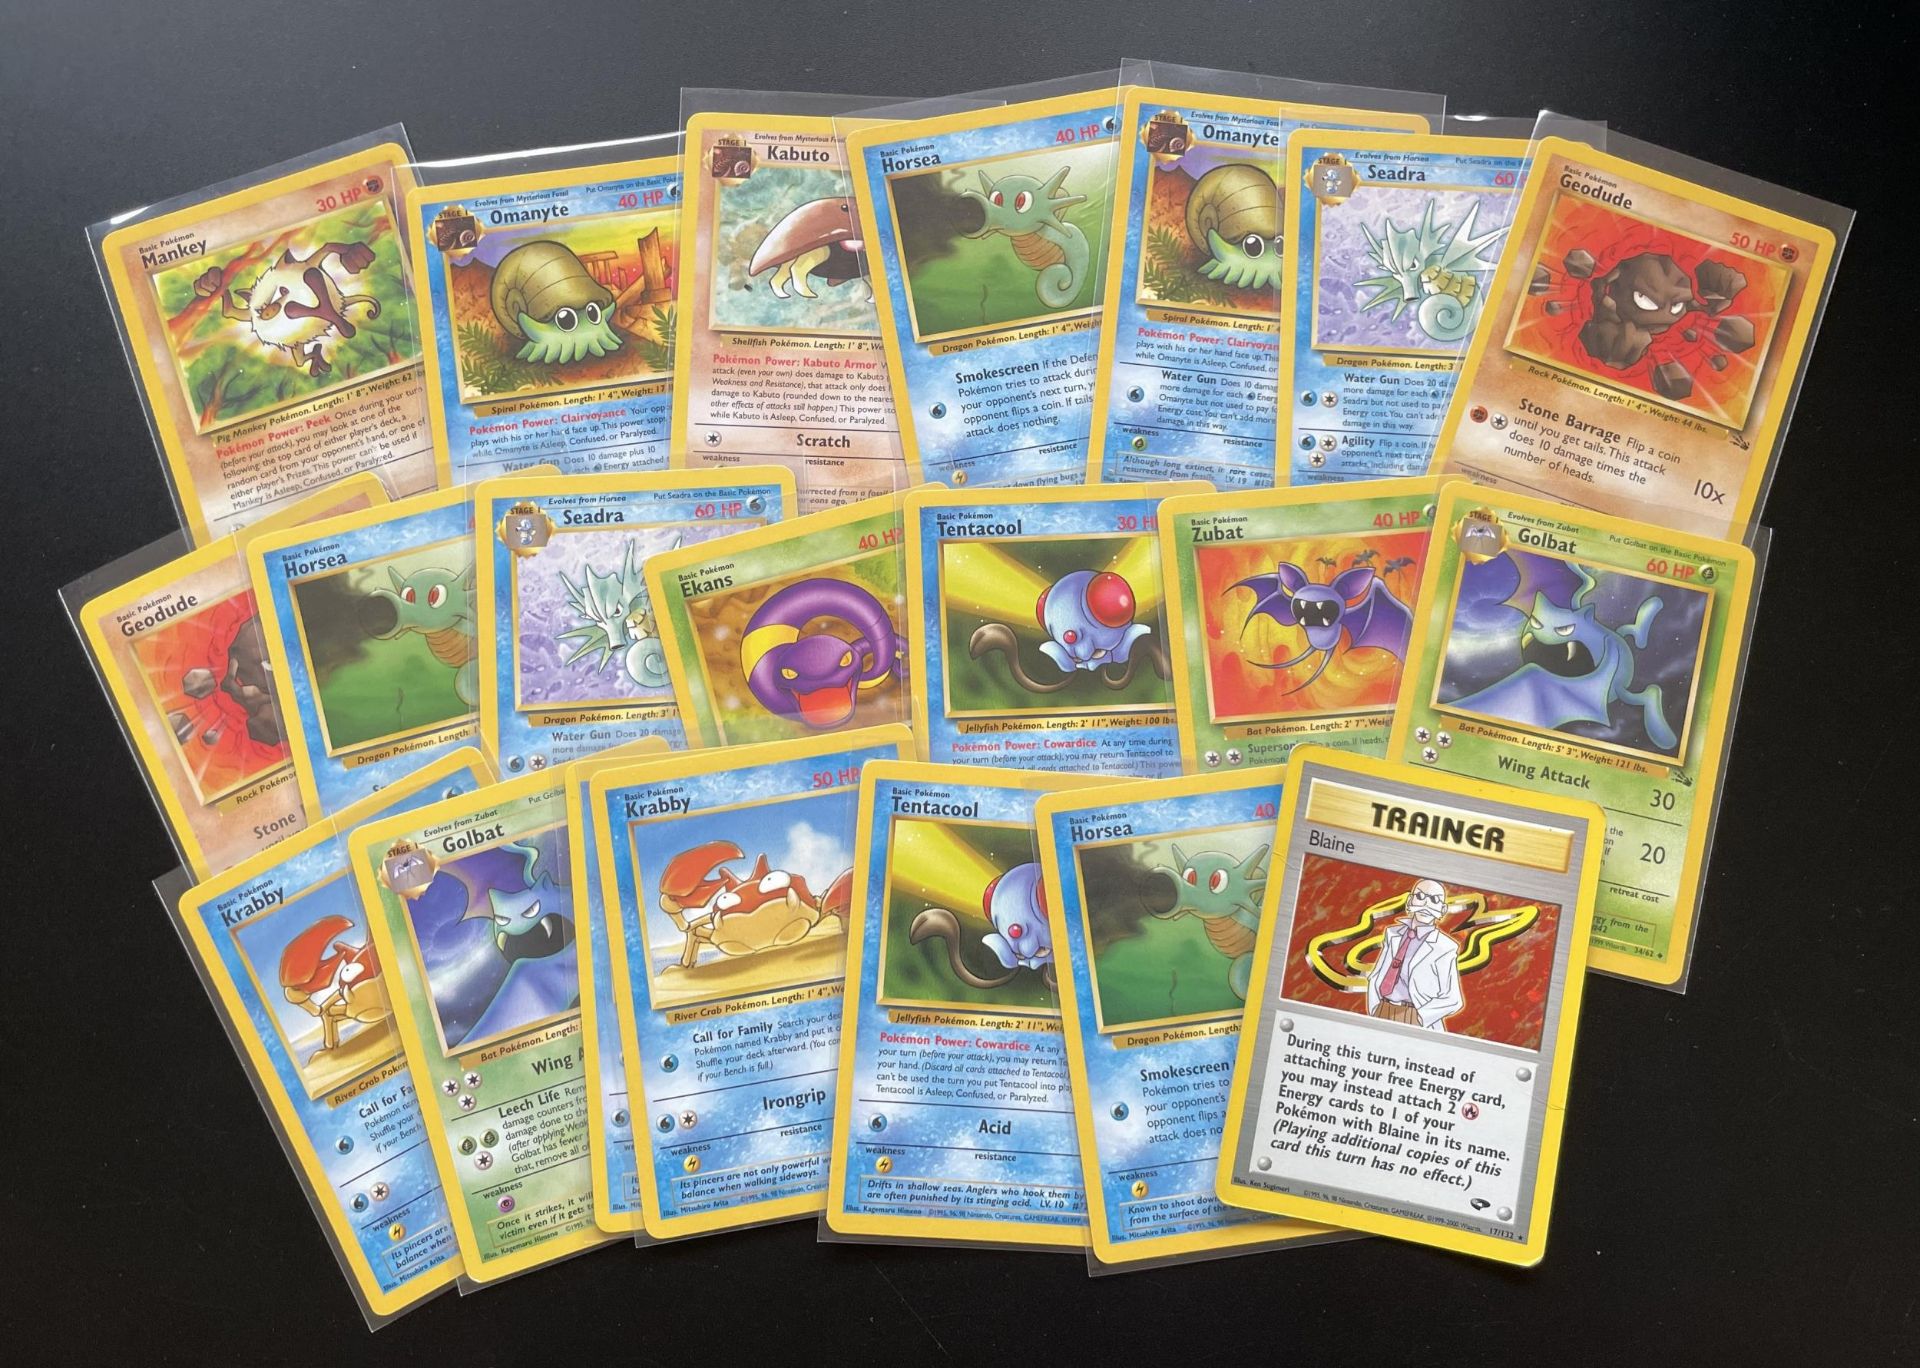 A COLLECTION OF 1999 WOTC POKEMON CARDS, FOSSIL SET, HOLO BLAINE GYM HEROES TRAINER ETC